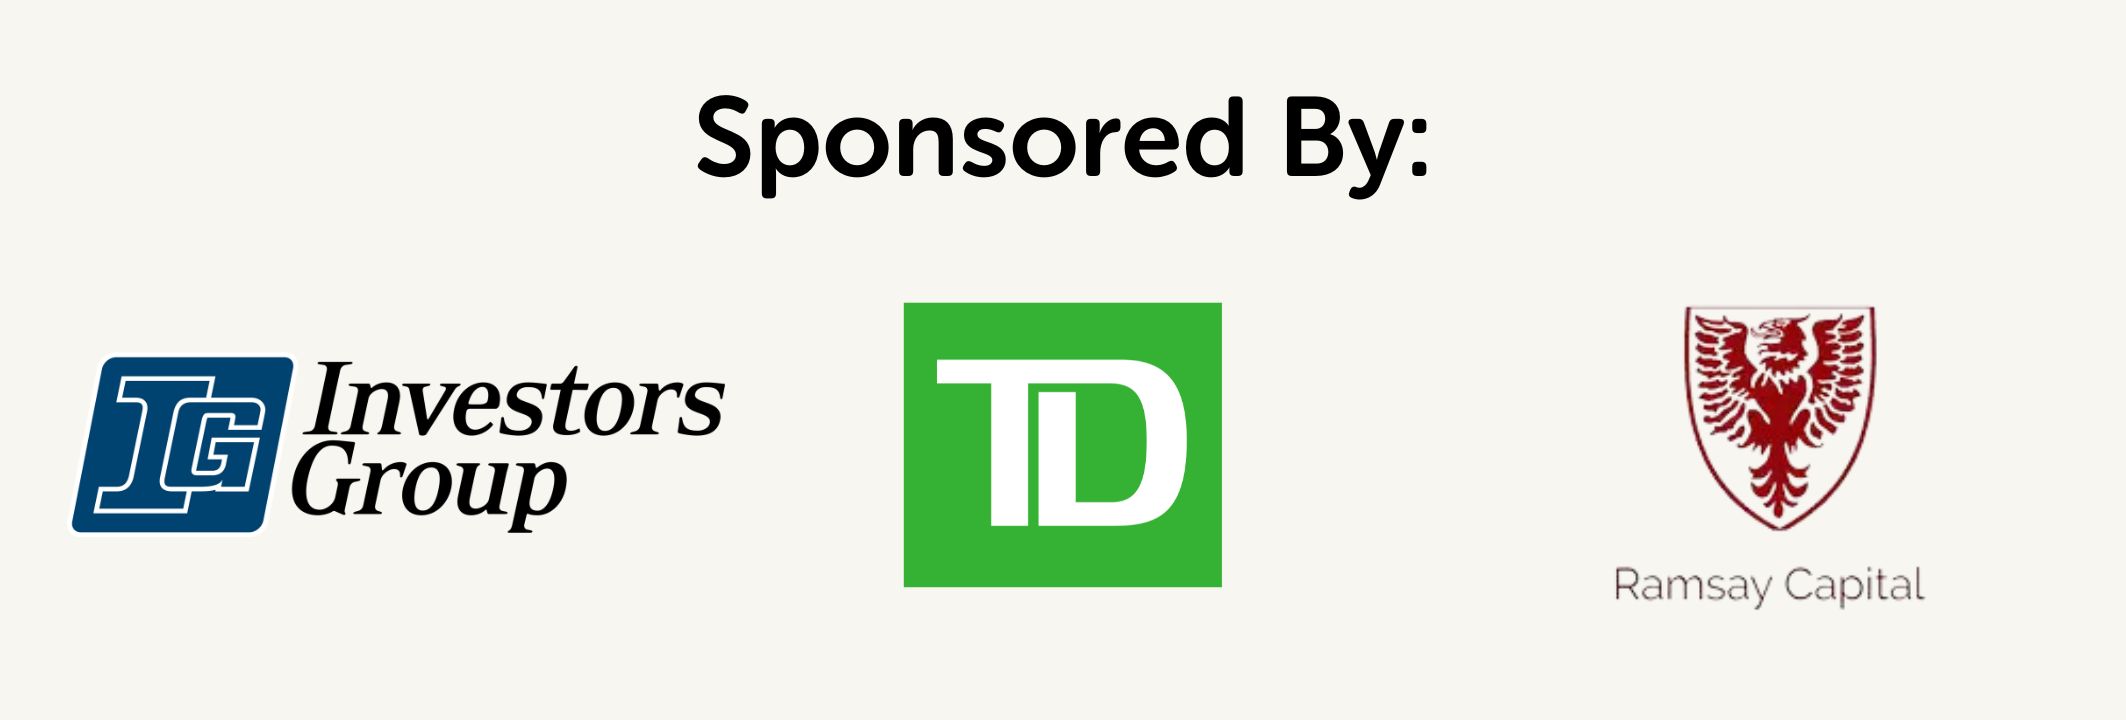 comedy event sponsors: IG Wealth Management, TD Canada Trust, Ramsay Capital